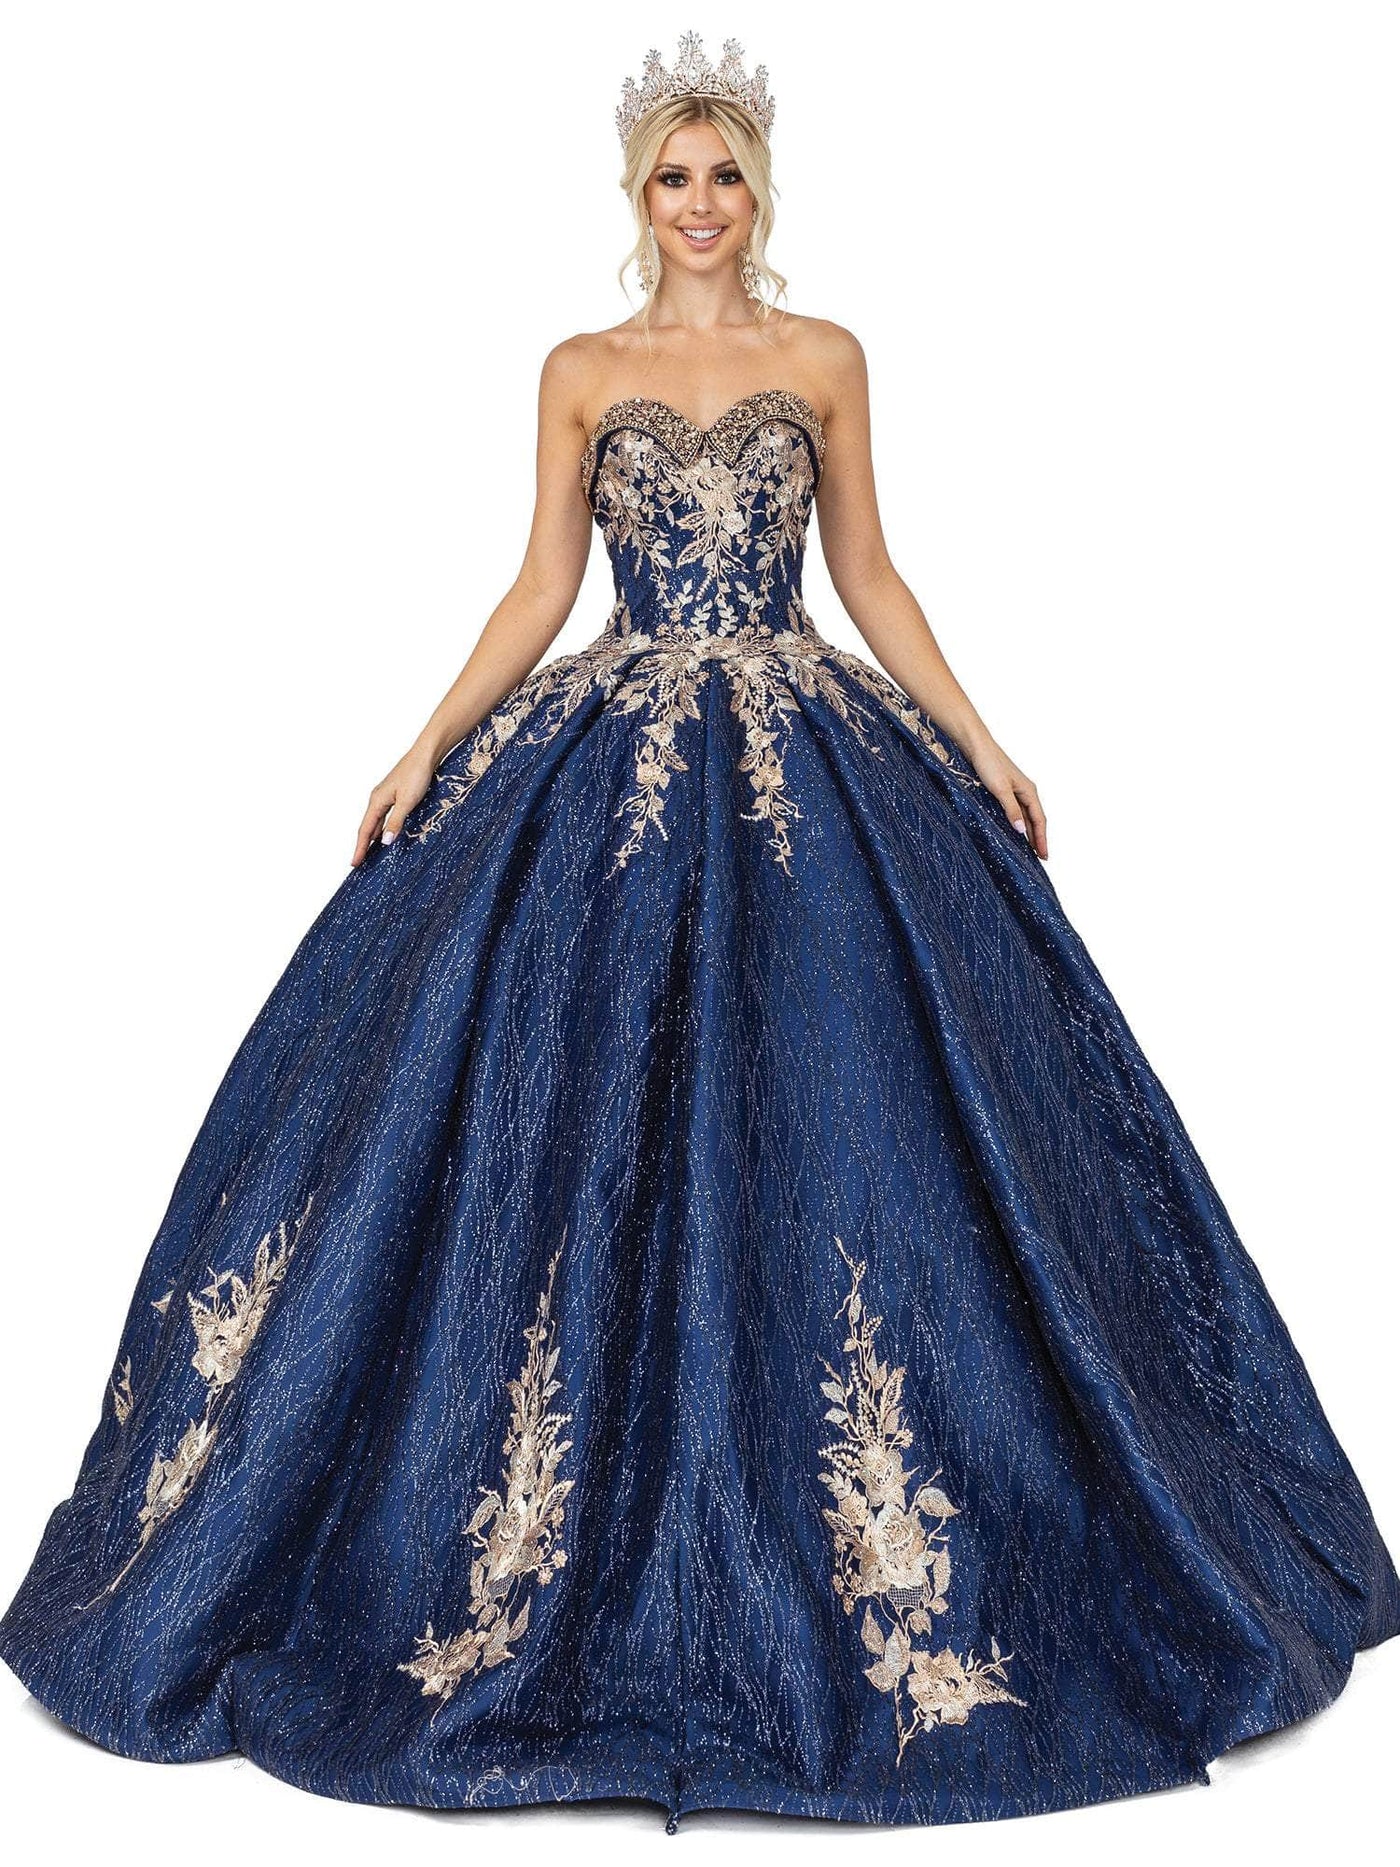 Dancing Queen 1541 - Embroidered Quinceanera Ballgown Special Occasion Dress